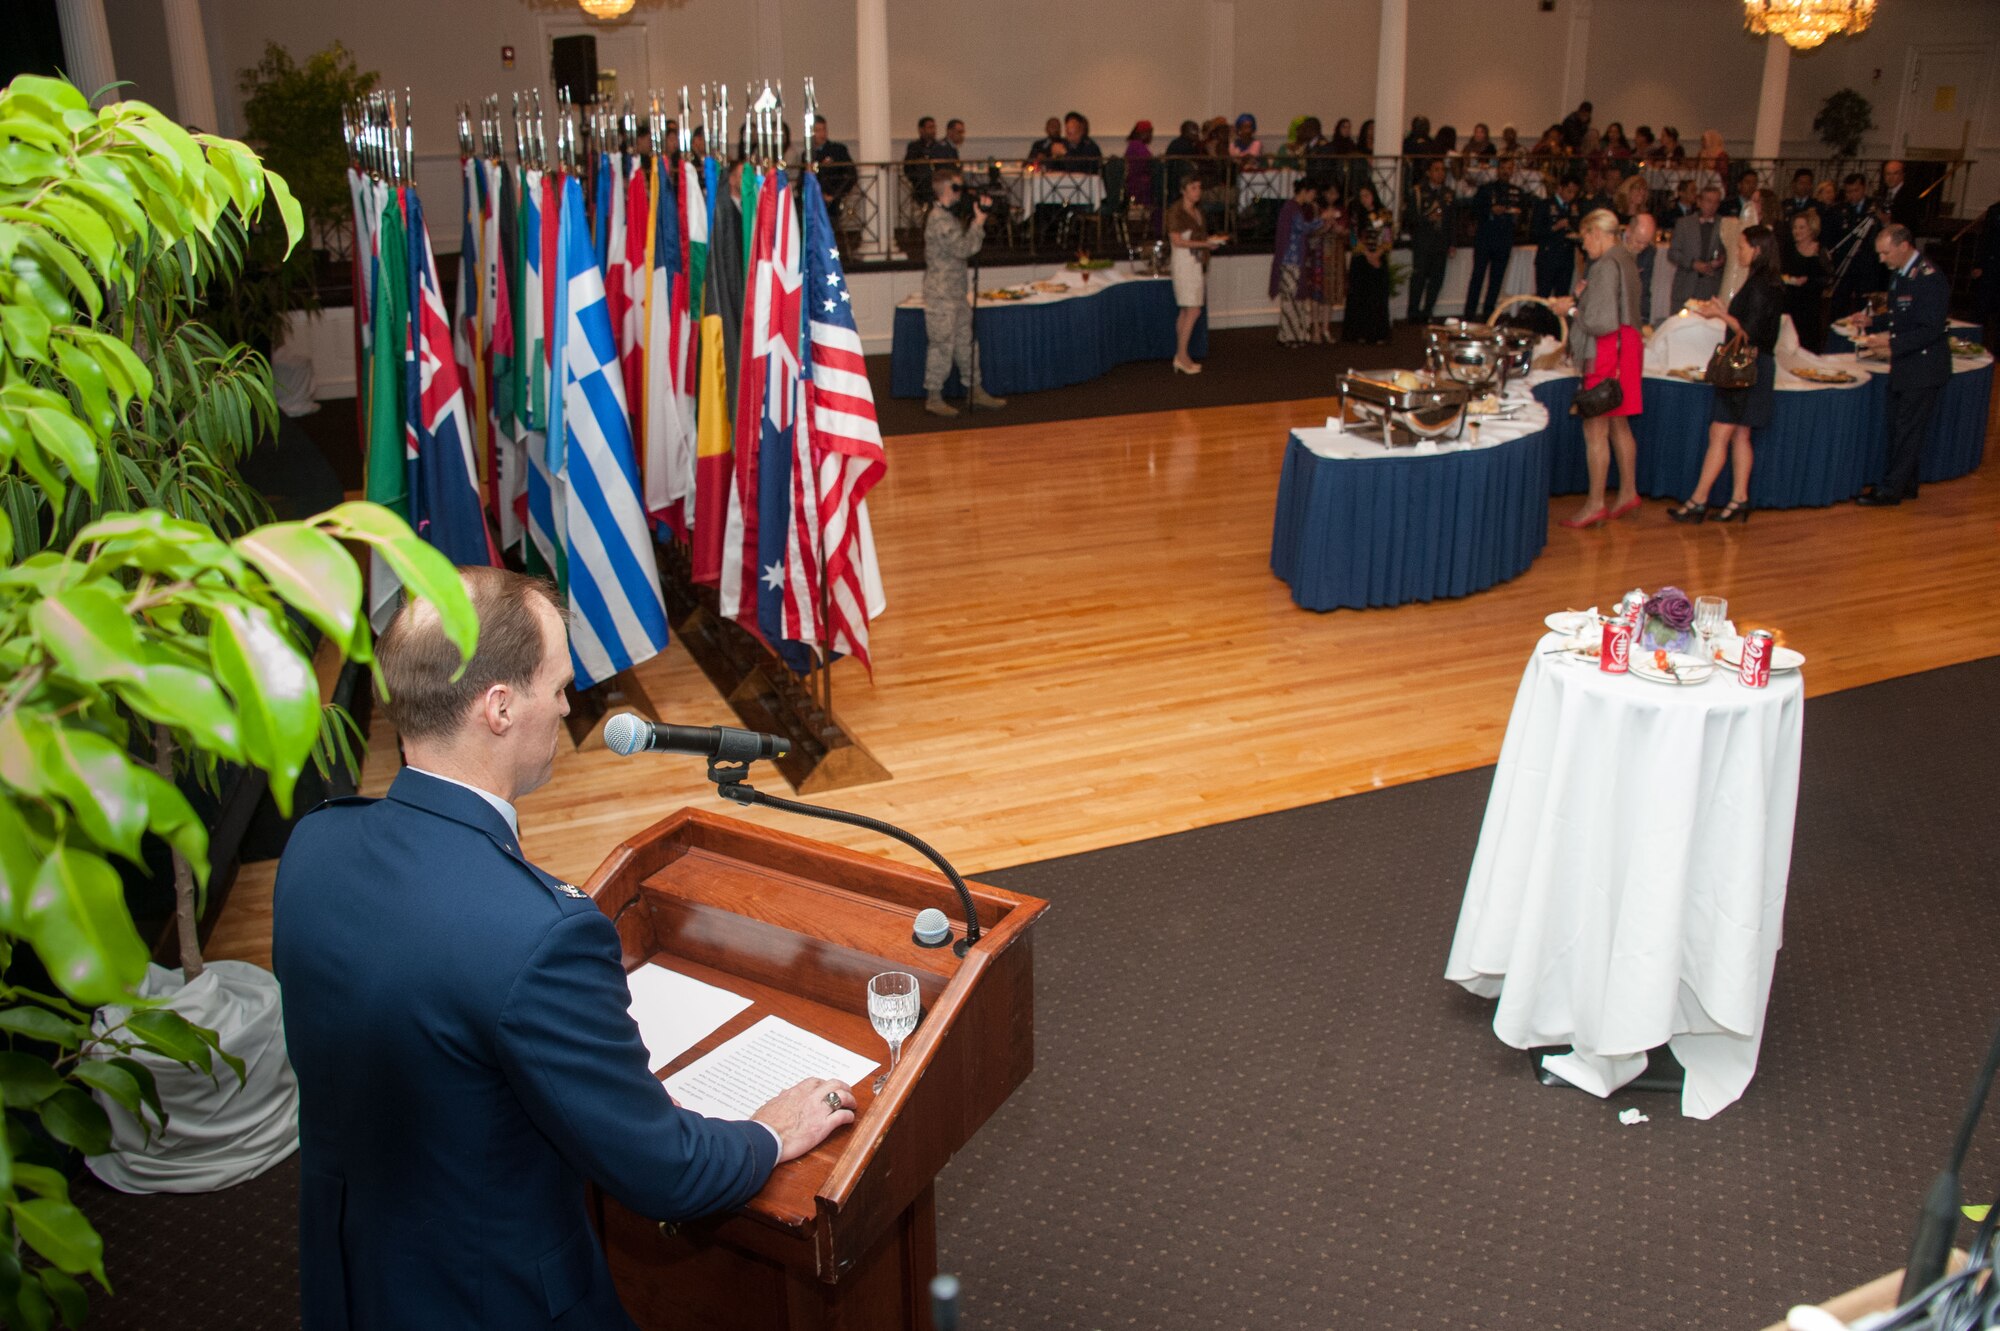 Air Force Col. Michael Peterson, speaks to attendees during the annual International Honor Roll induction ceremony on Maxwell Air Force Base, Ala., Feb. 3, 2016. Selected international officers are presented awards who have attained prominent positions in their countries. The selection of each award is based on input from the embassy of the individuals’ country. The Secretary of the Air Force hosted the first International Honor Roll in 1988 and has become an annual event since.